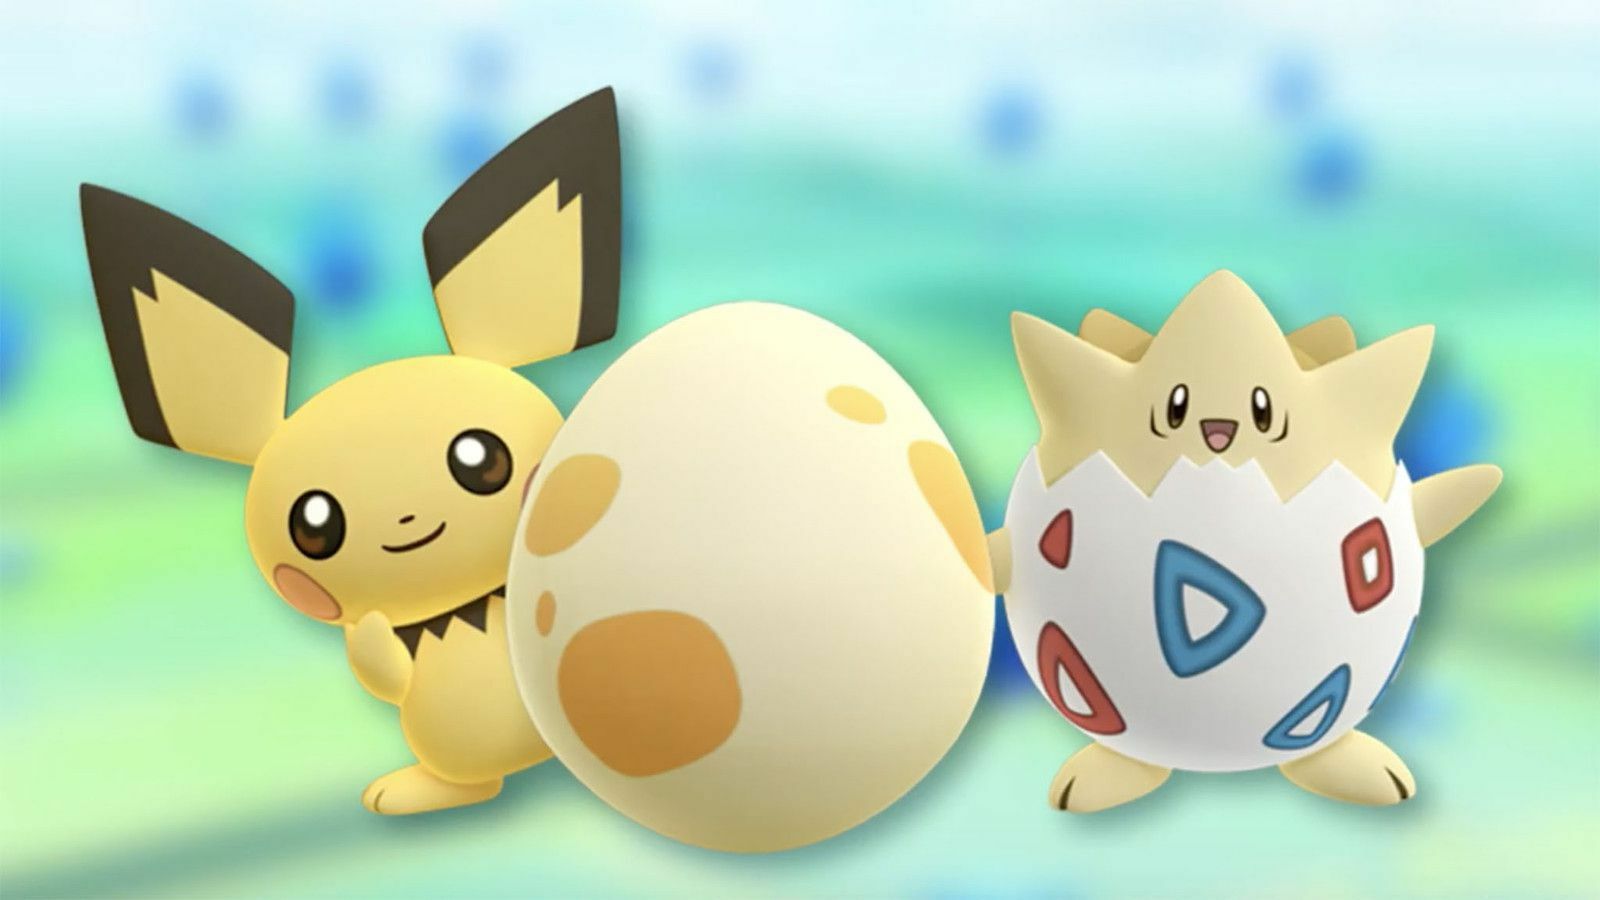 What is the Egg Pokemon?